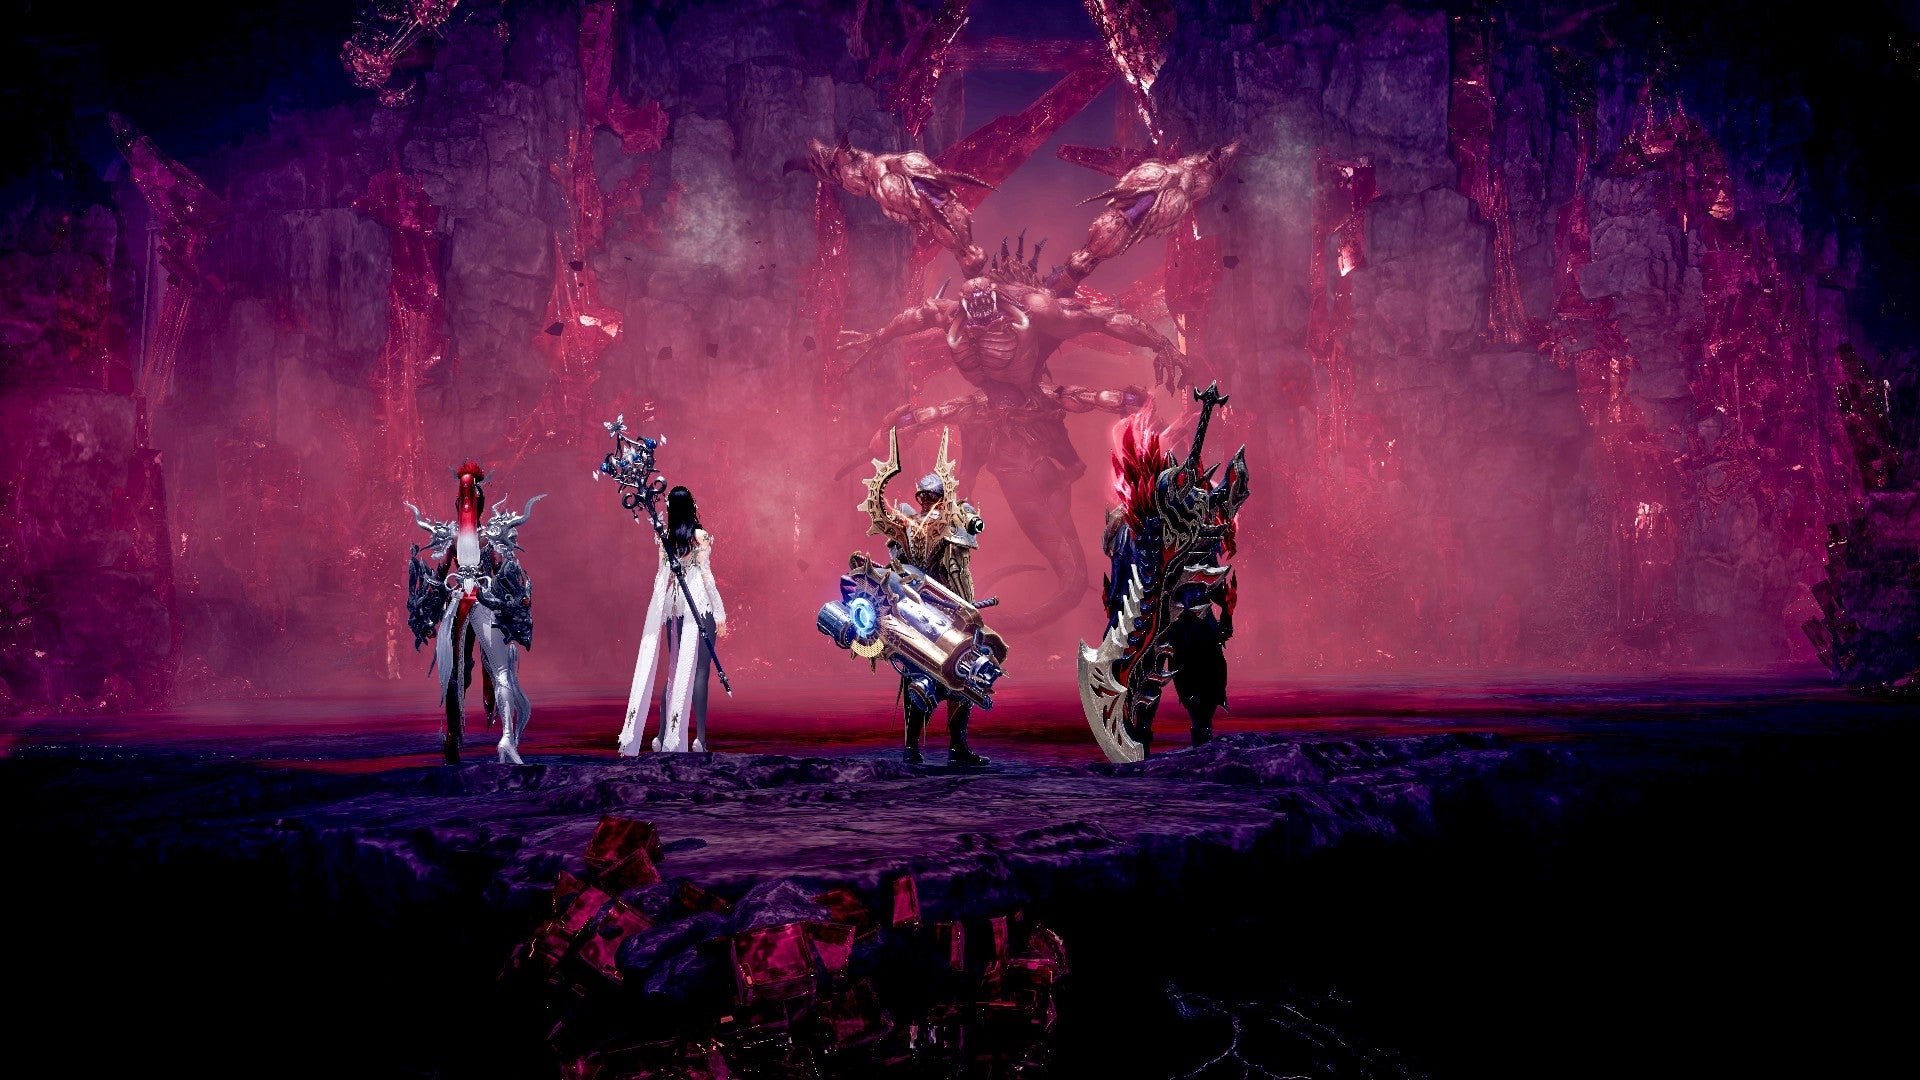 Squad of Lost Ark players staring at a scary demon in a cave illuminated with a hazy red light. The demon looks very angry.